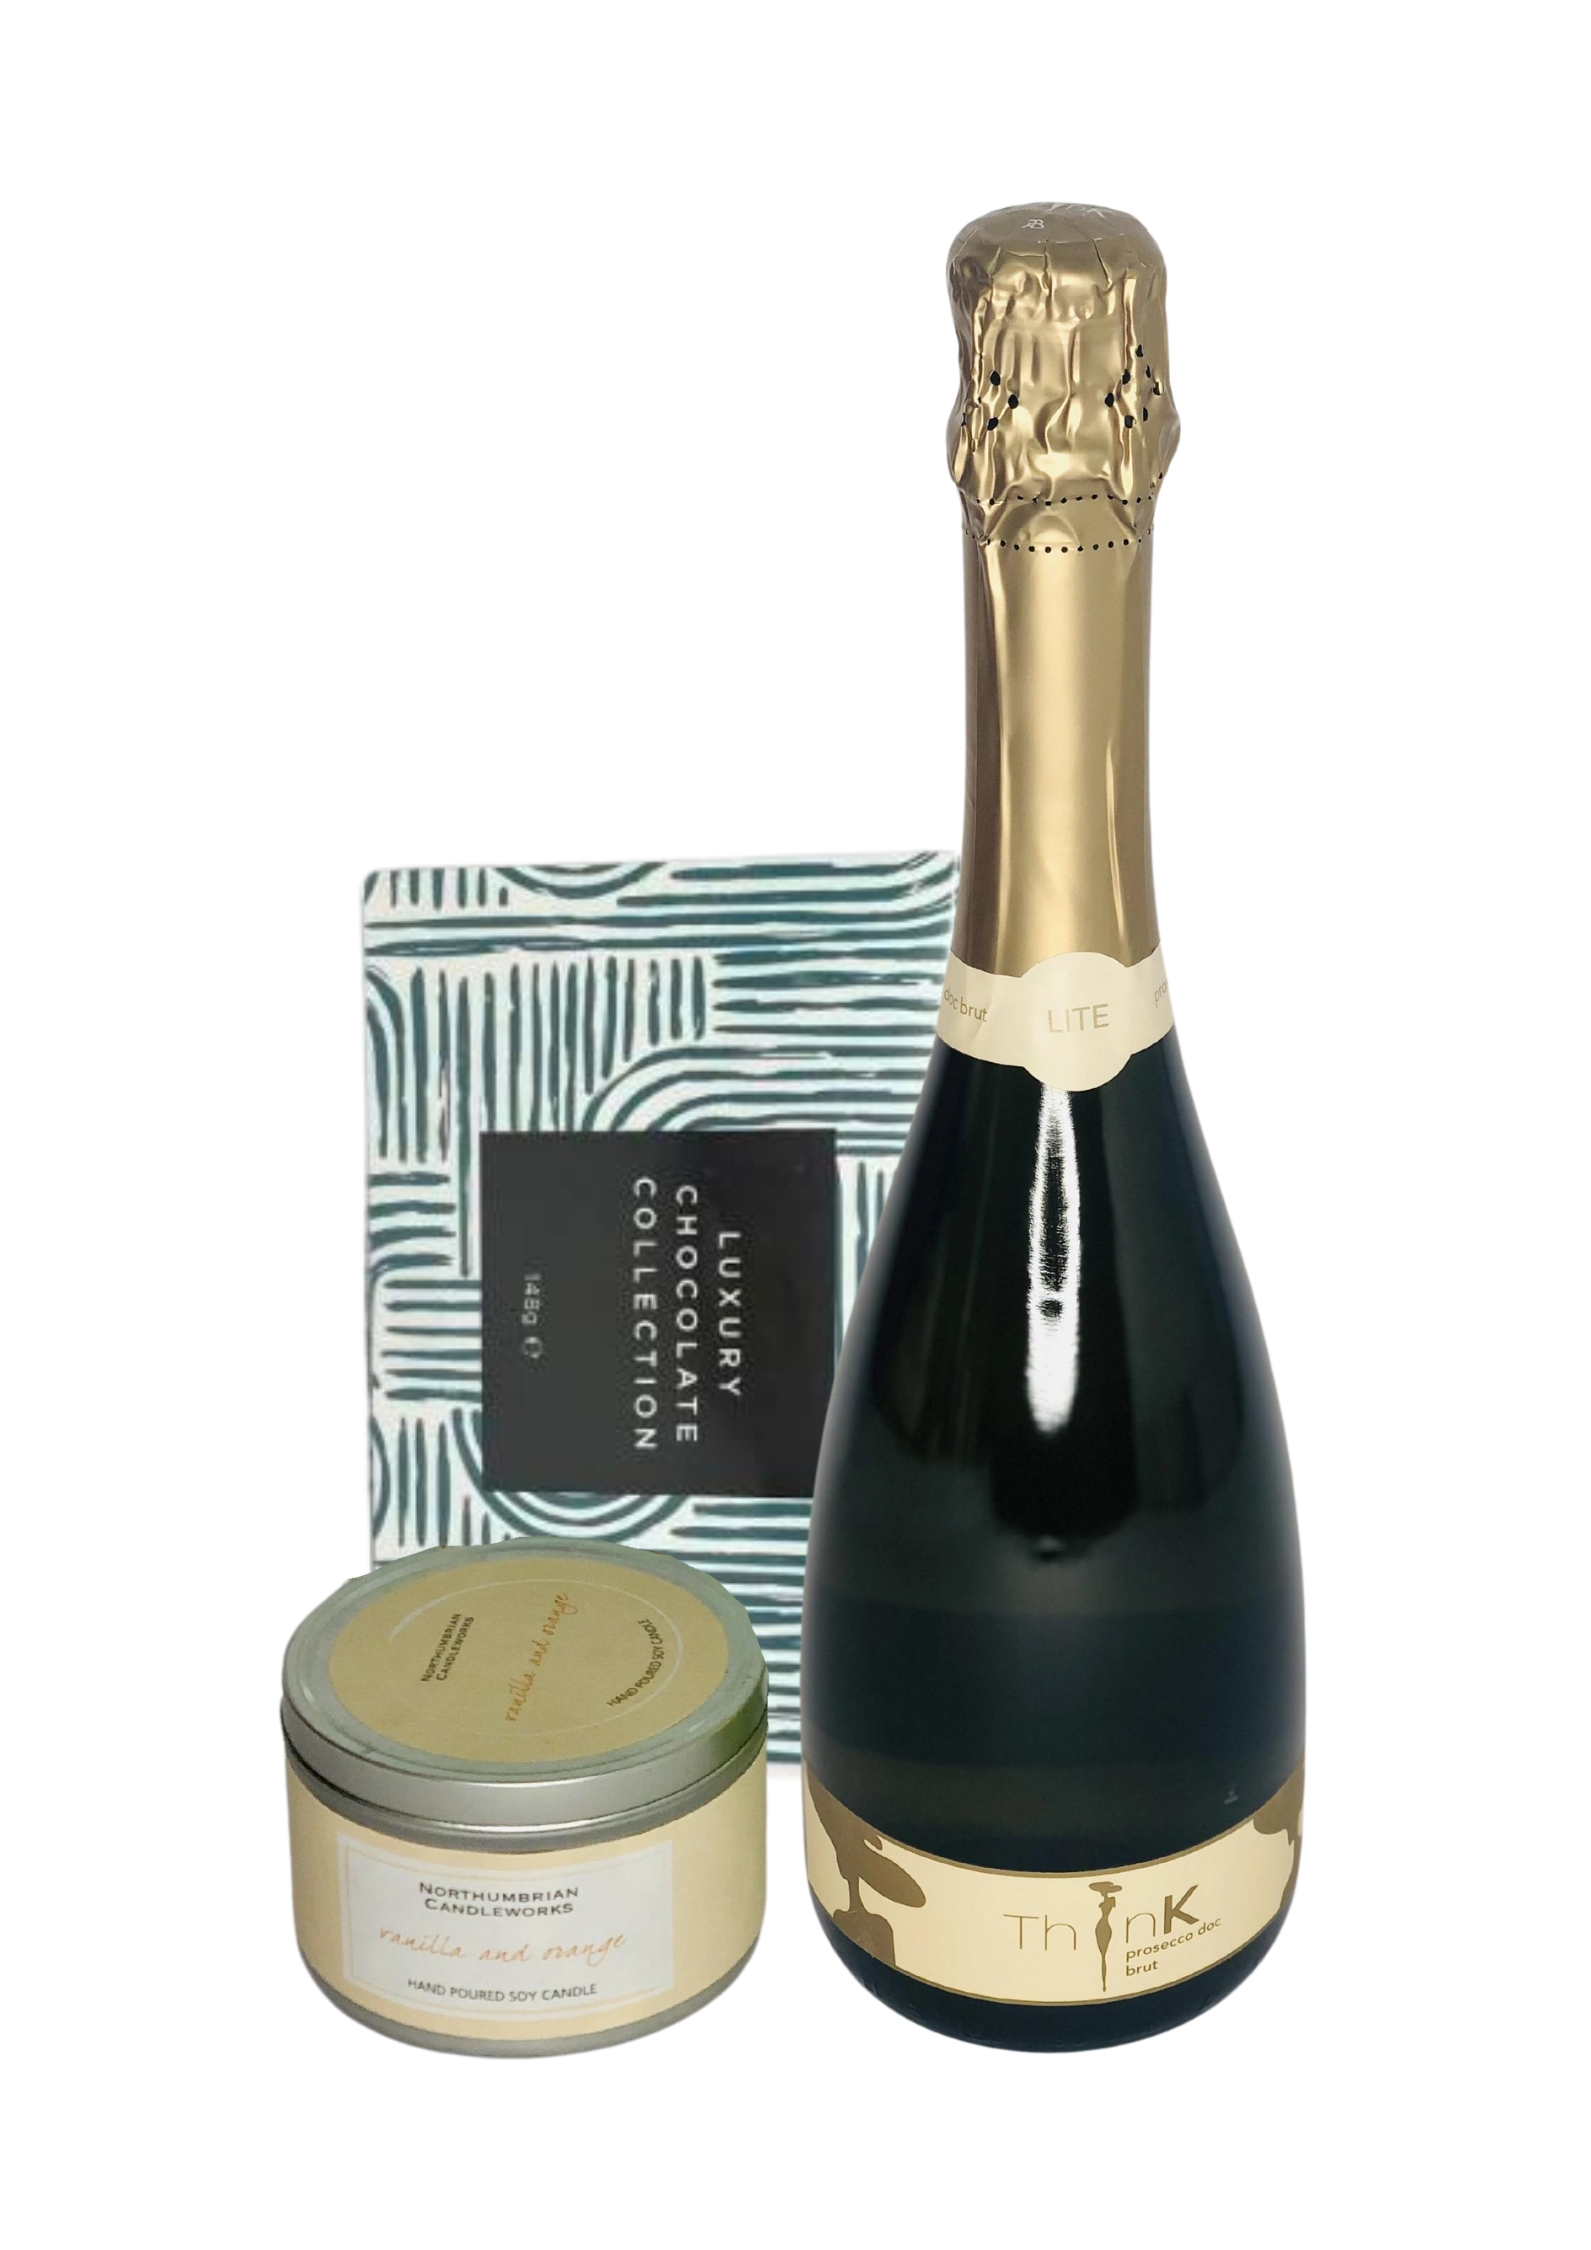 Beautiful Bubbles Gift Set - Prosecco Chocolates and Scented Candle